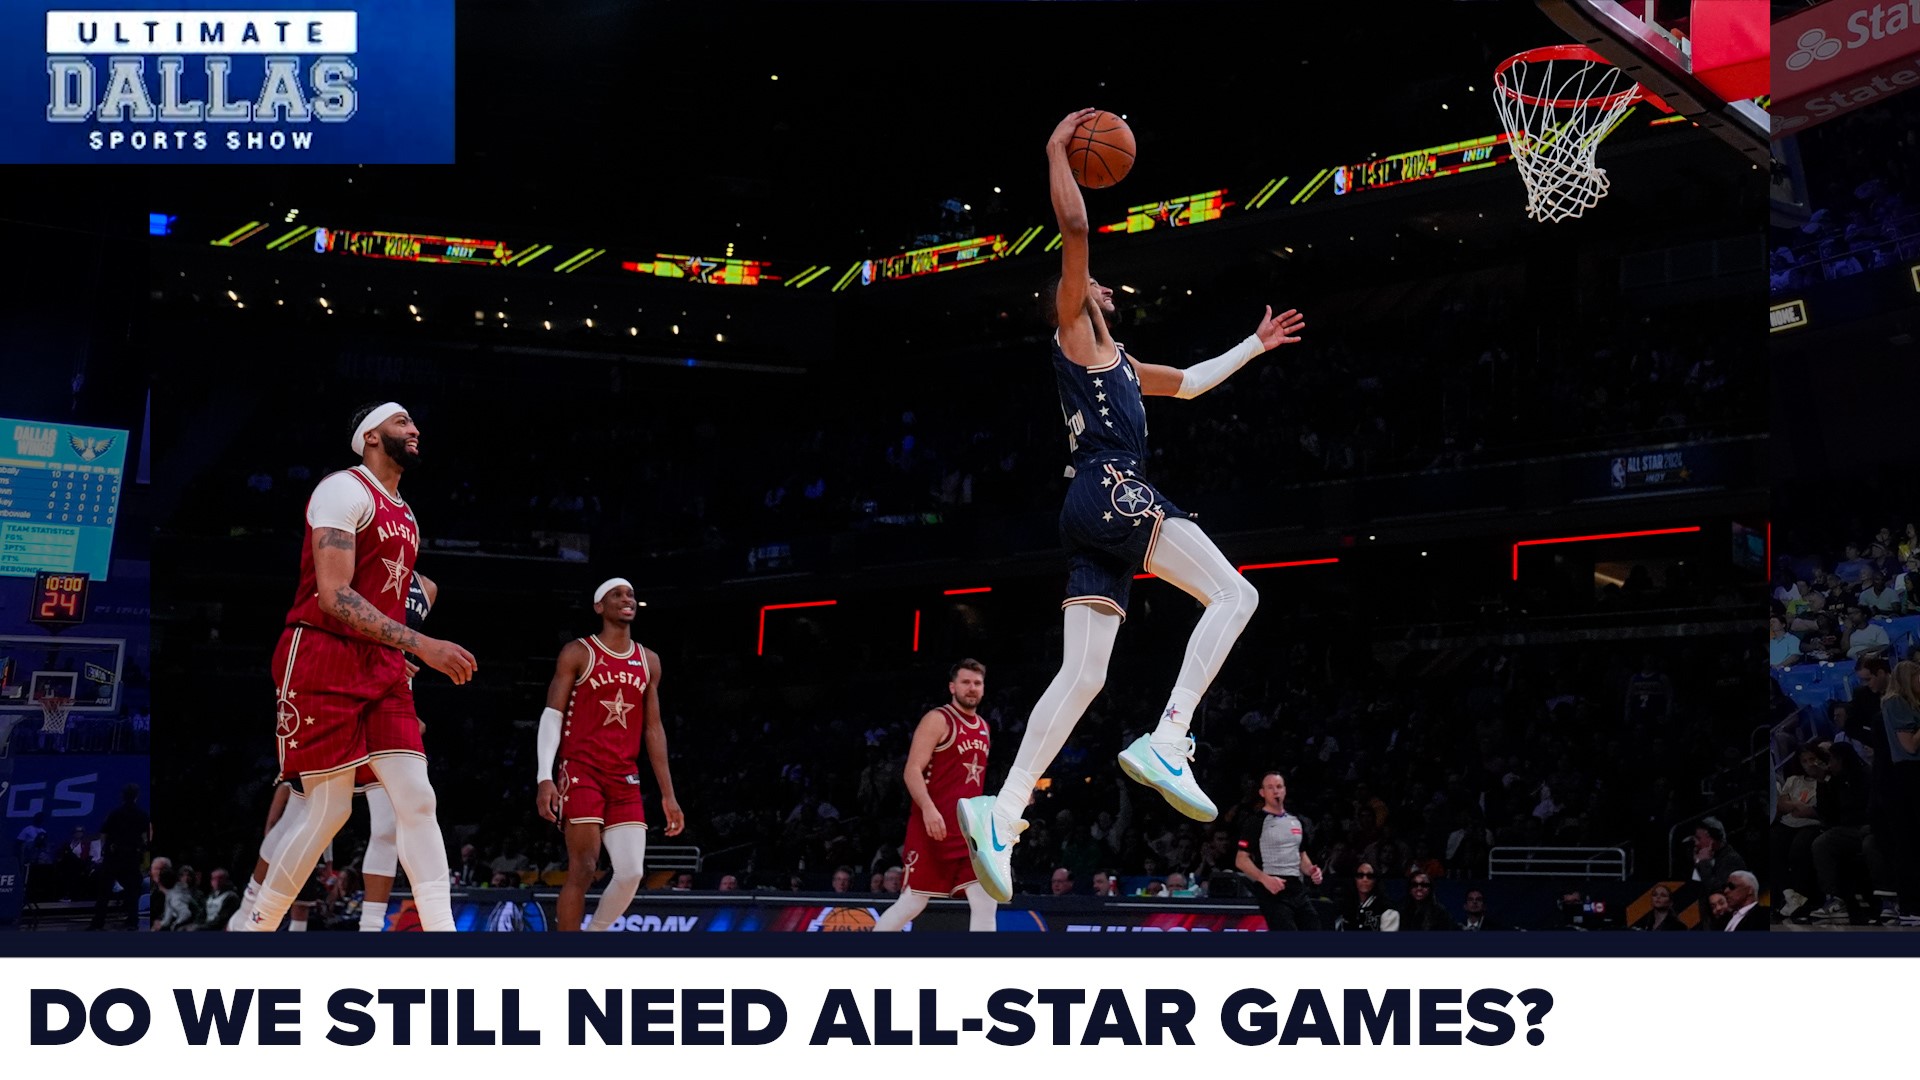 No Fence Riding! The Ultimate Dallas Sports Show breaks down a trio of topics including whether we still need All-Star Games and if NIL is destroying college sports.